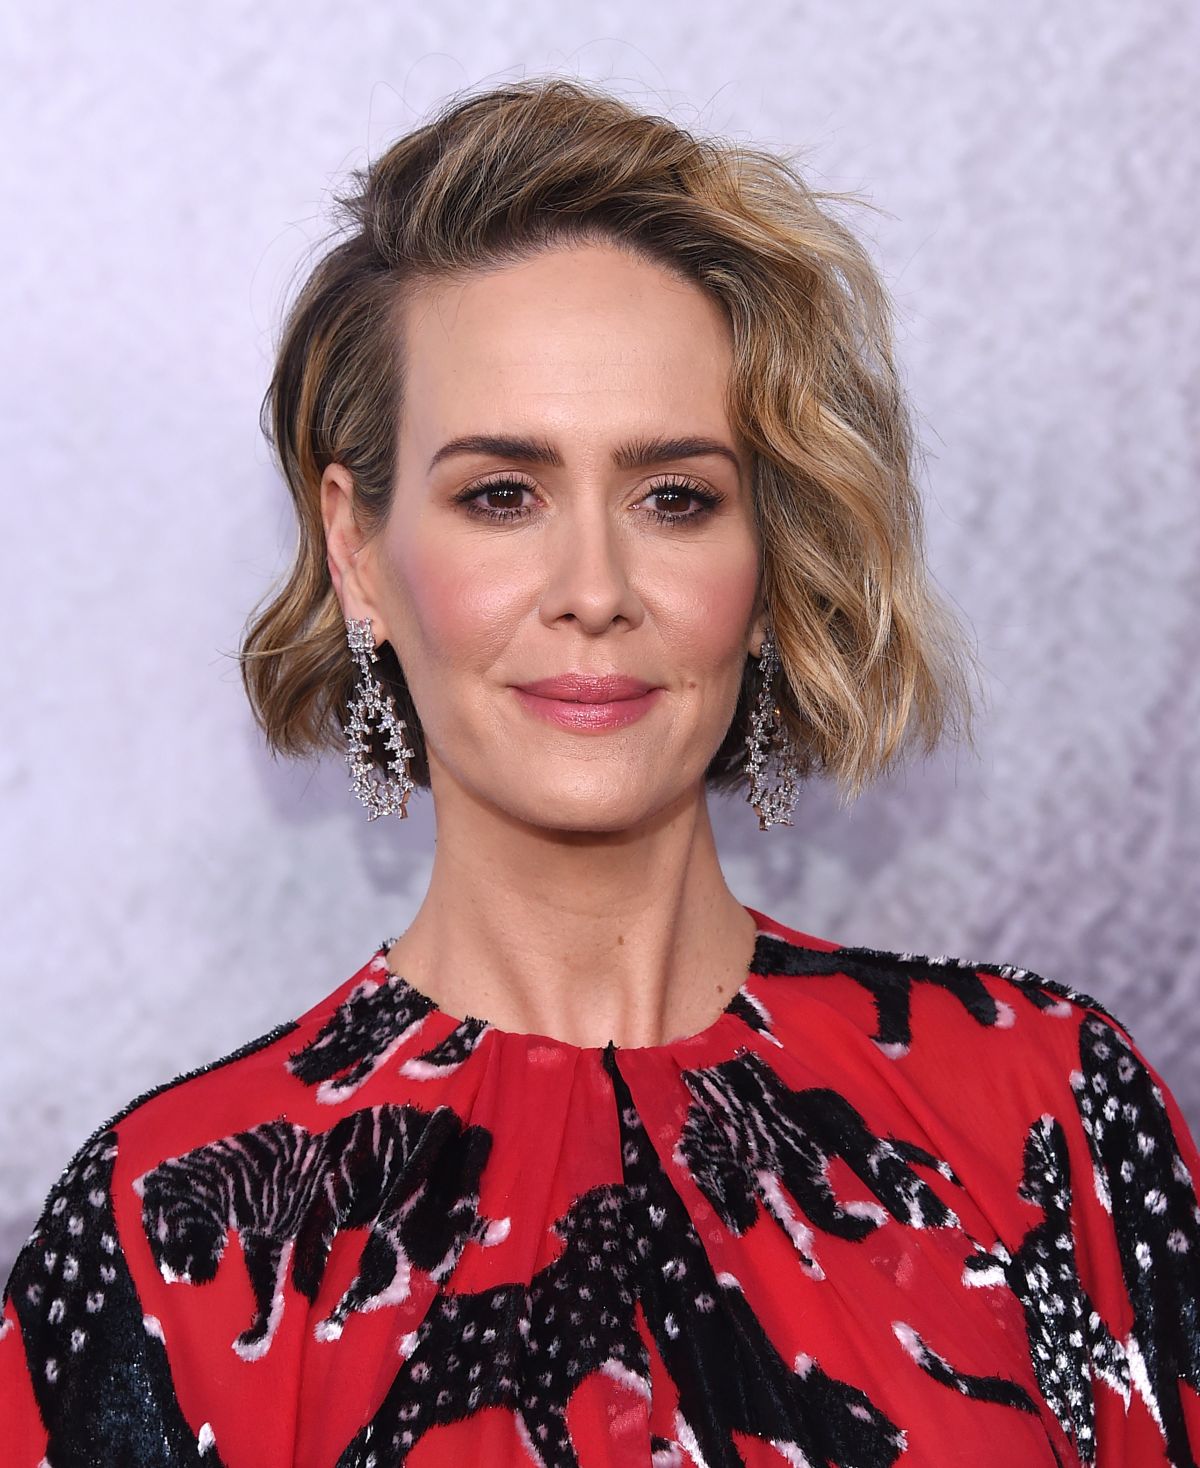 SARAH PAULSON at American Horror Story: Cult FYC Event in Los Angeles ...